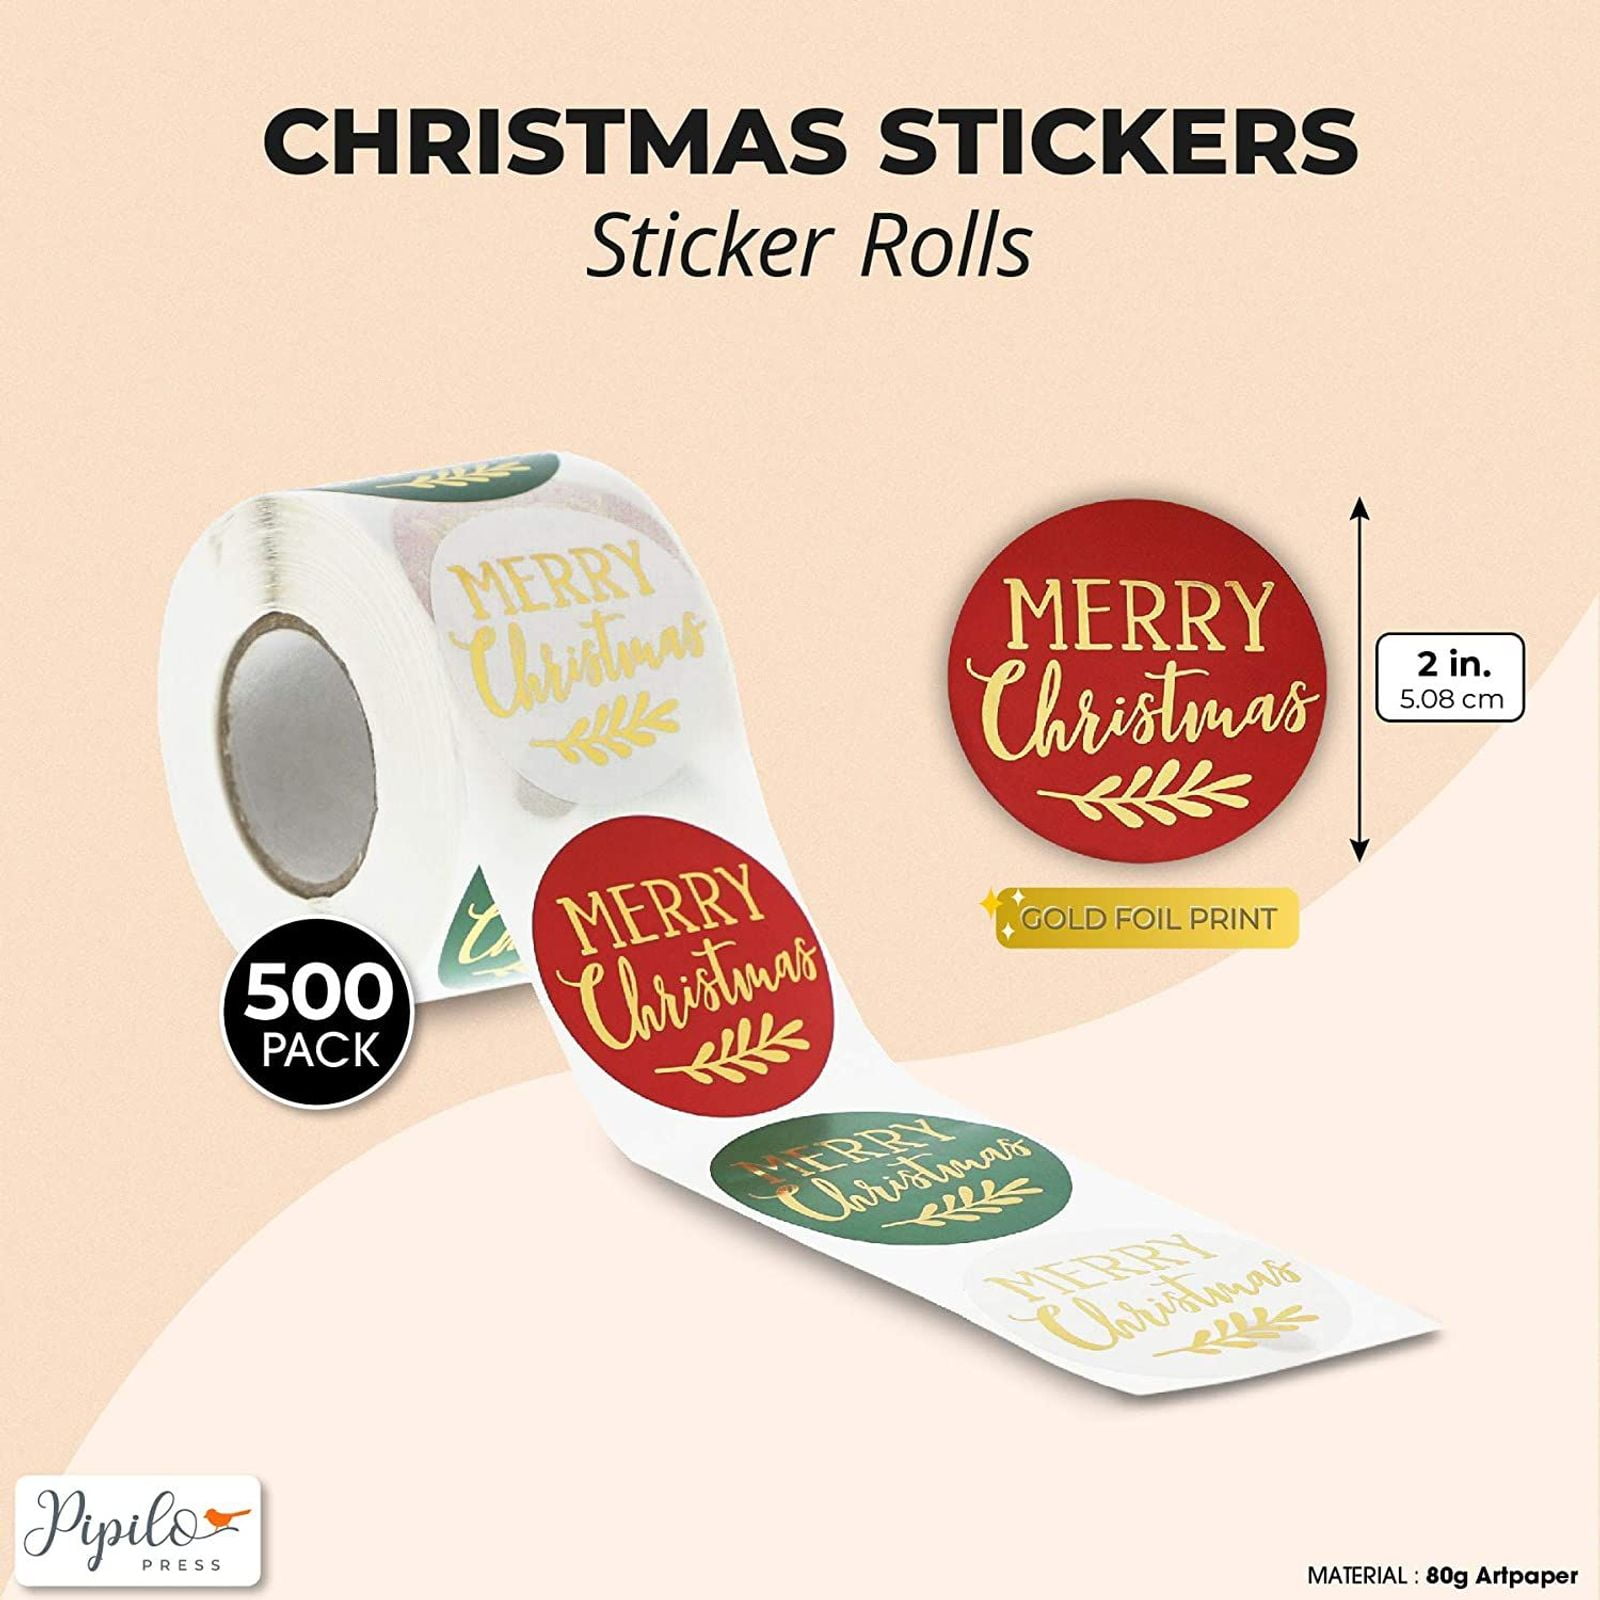 Gold foil Christmas Envelope Eeals 500 Labels Per Roll Filhome 1.5 Plaid Round Merry Christmas Stickers